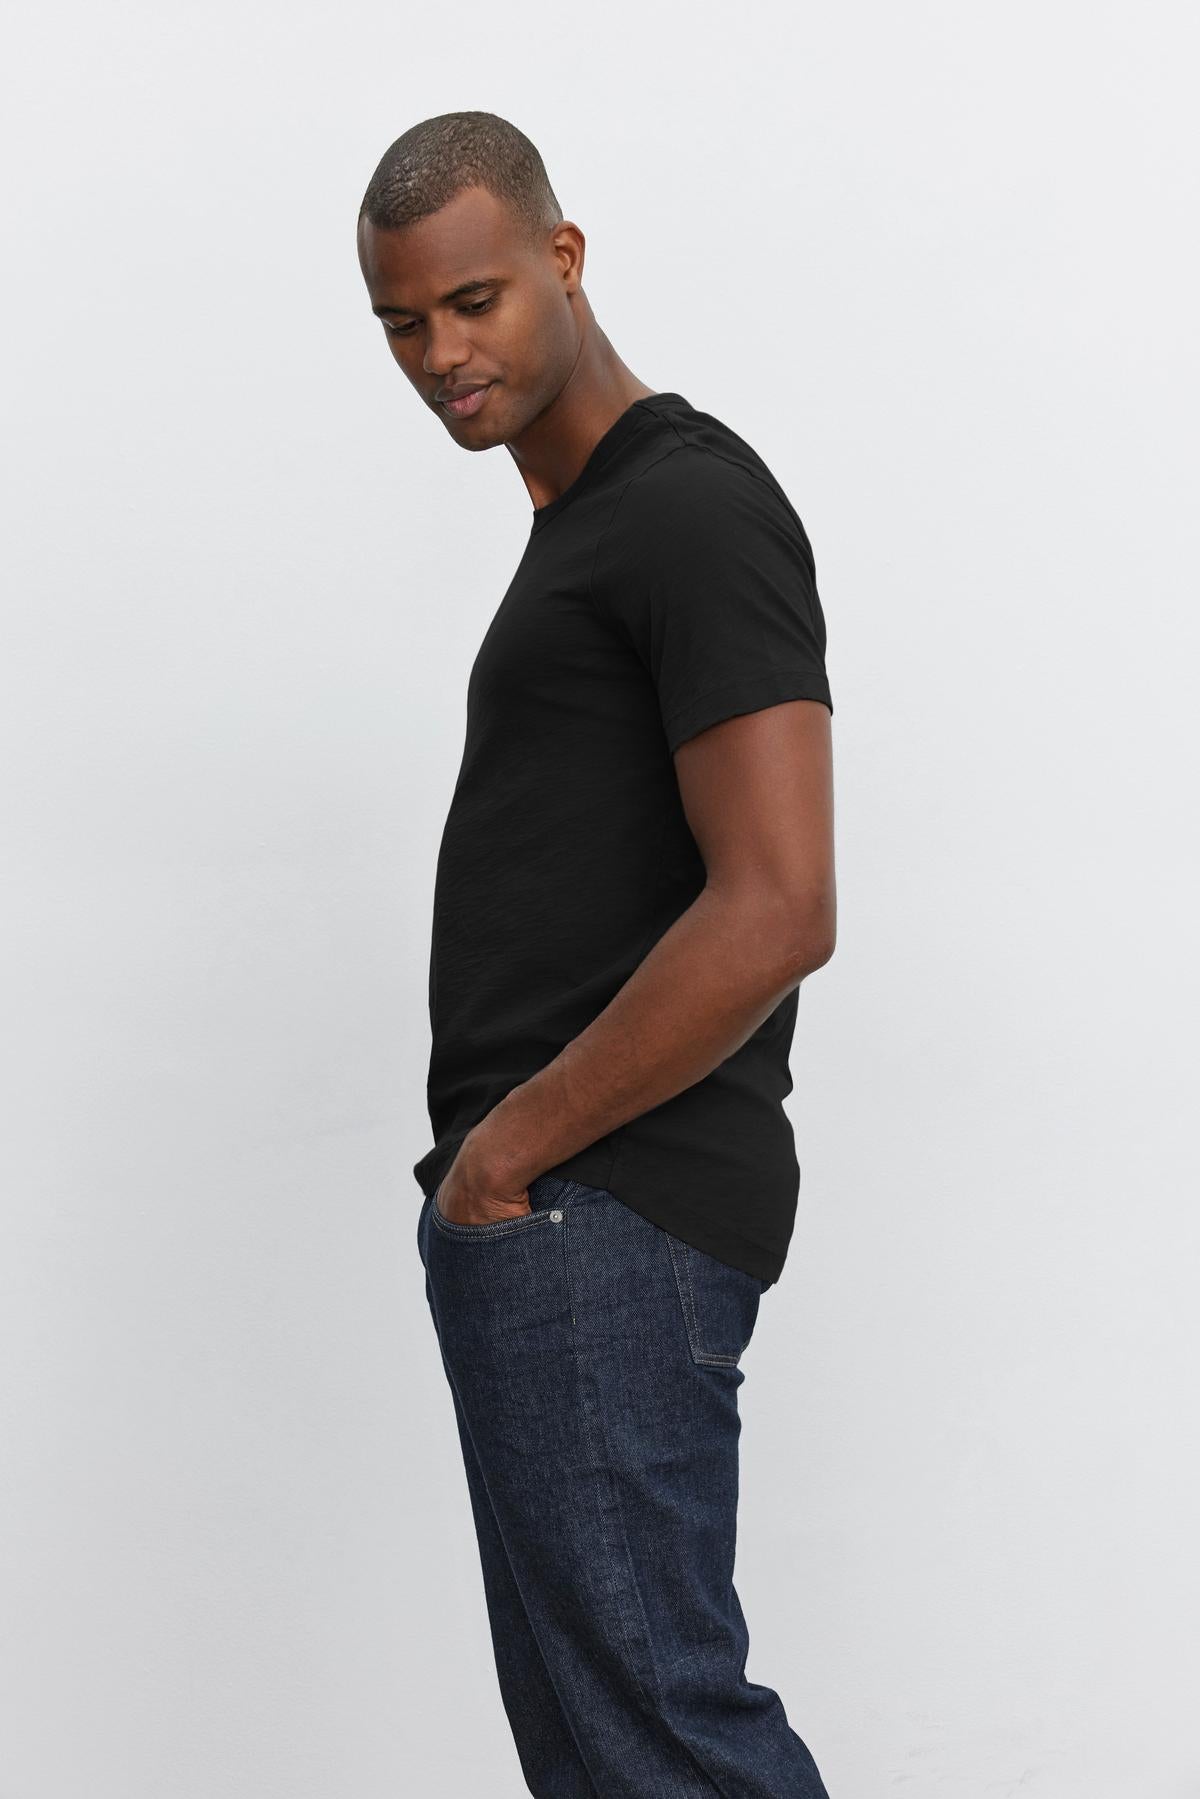 Man in a black crew neck AMARO TEE with heathered texture and jeans standing sideways against a white background by Velvet by Graham & Spencer.-36273922048193